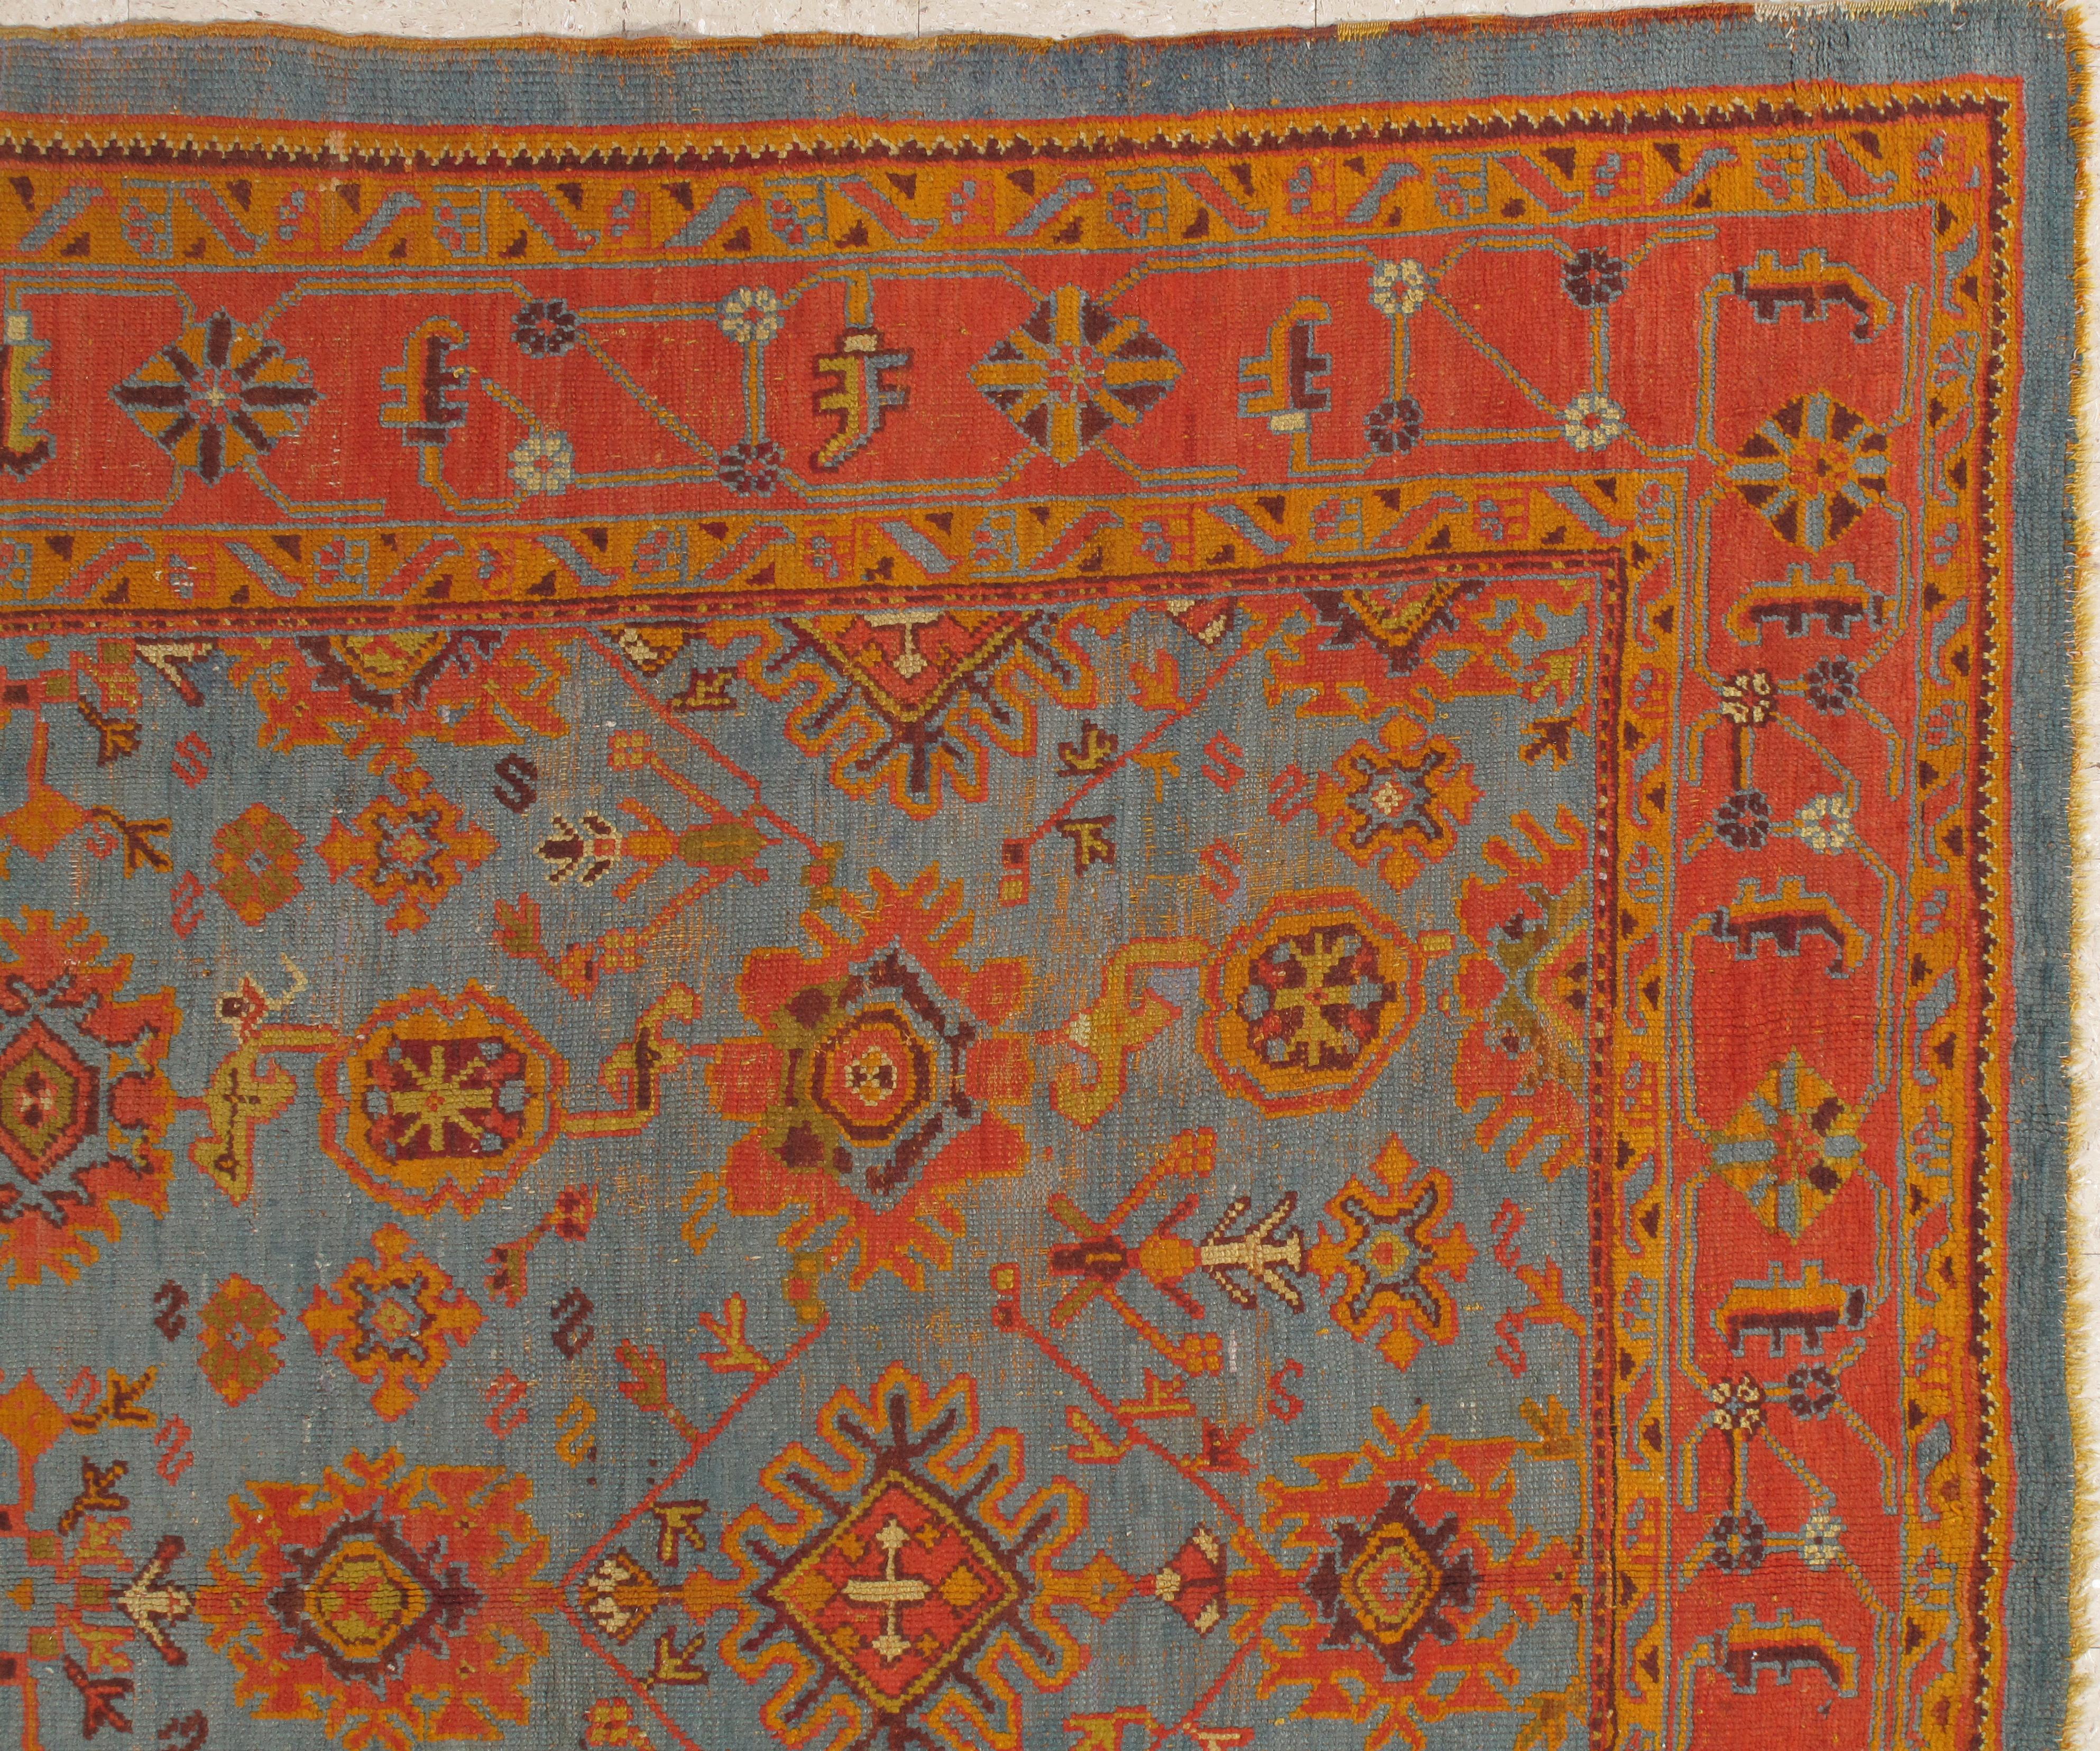 West Anatolia is one of the largest weaving regions in Turkey. Since the 15th century, Turkish rugs have always been on top of the list for having fine oriental rugs.
Oushak rugs such as this, are desirable in today’s highly decorative market. A